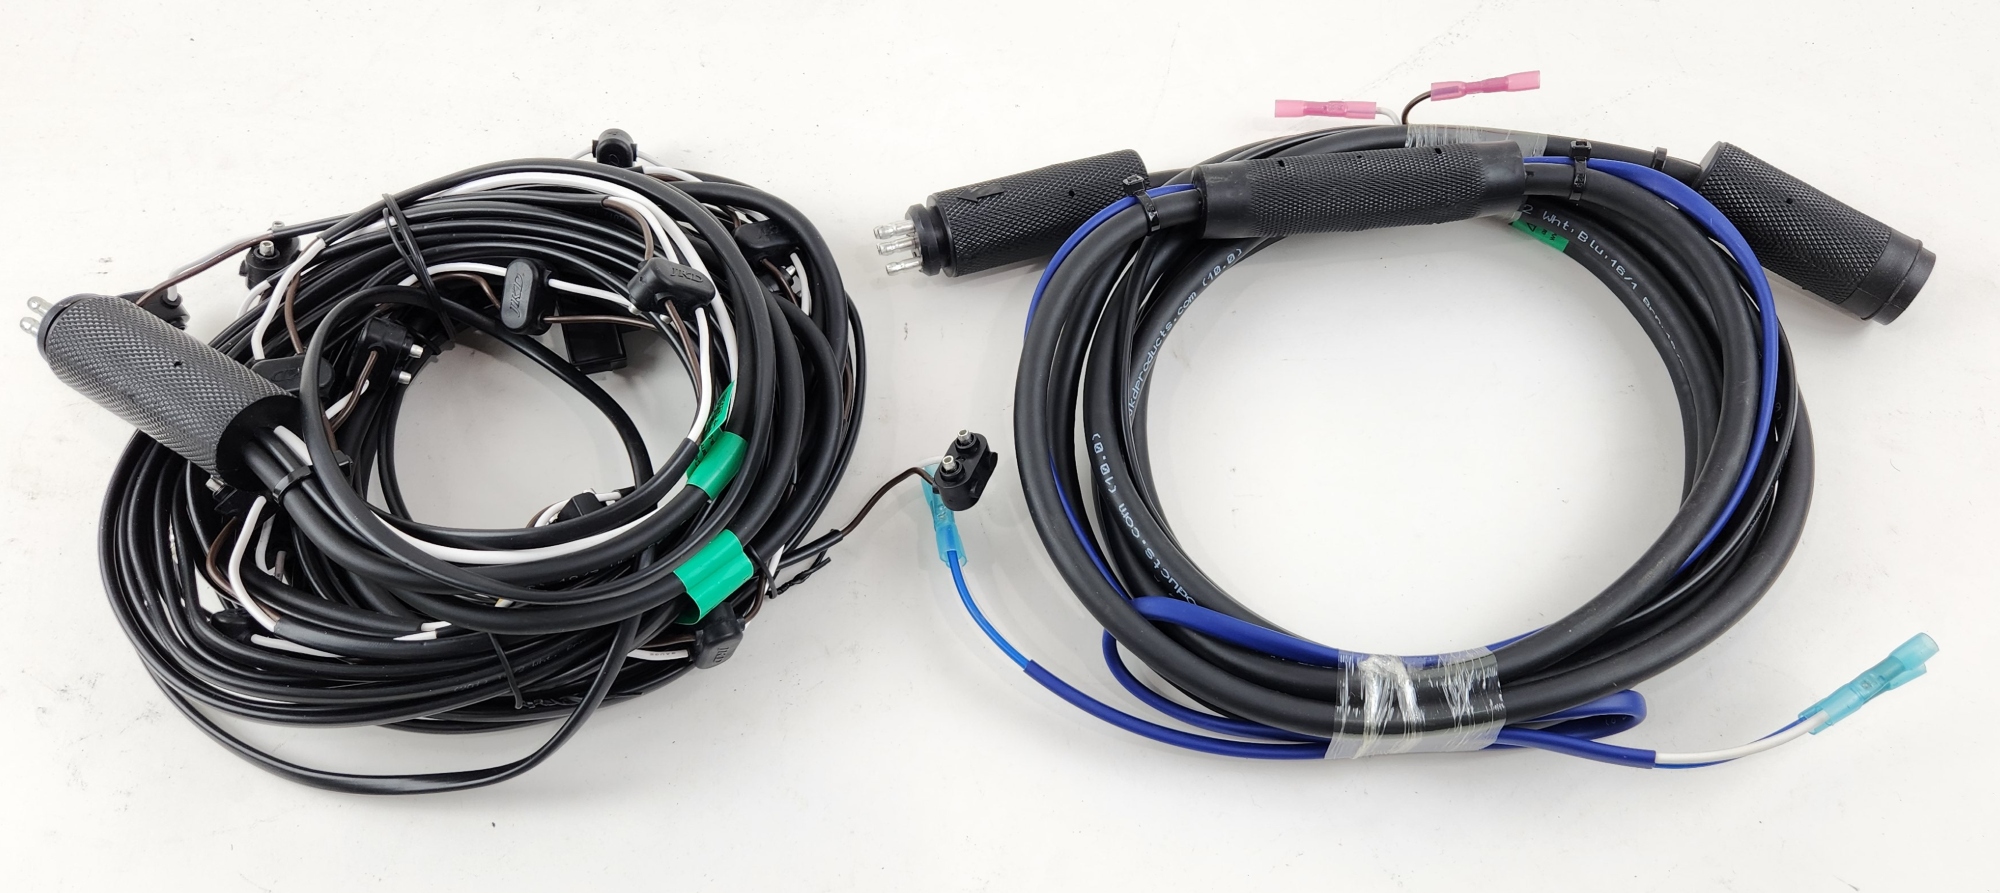 Load Trail 090102 Wire Harness Kit for 14 feet Dump Trailers